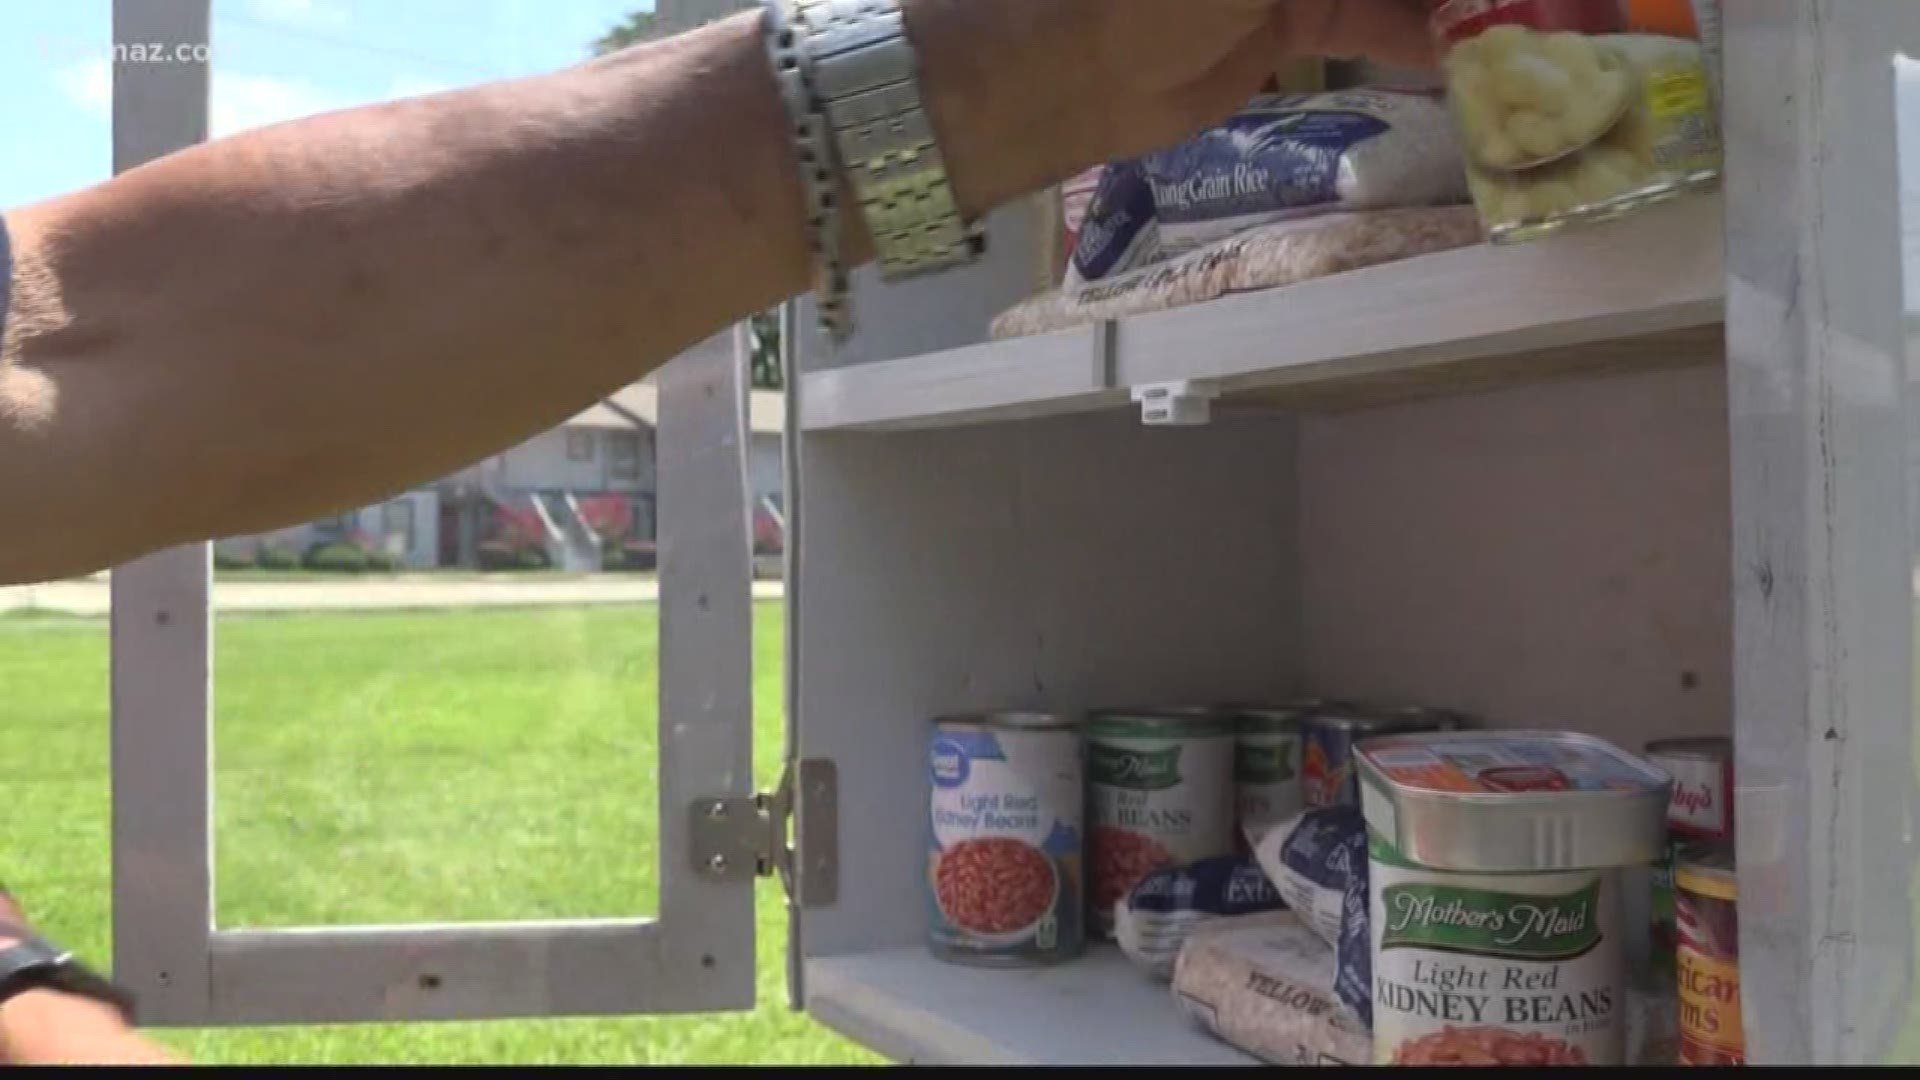 One in five central Georgians aren't always sure where their next meal may come from, according to the Middle Georgia Community Food Bank. 
In Fort Valley, a church has found a new way to make sure someone who needs food can get it quickly, anonymously, and for free.